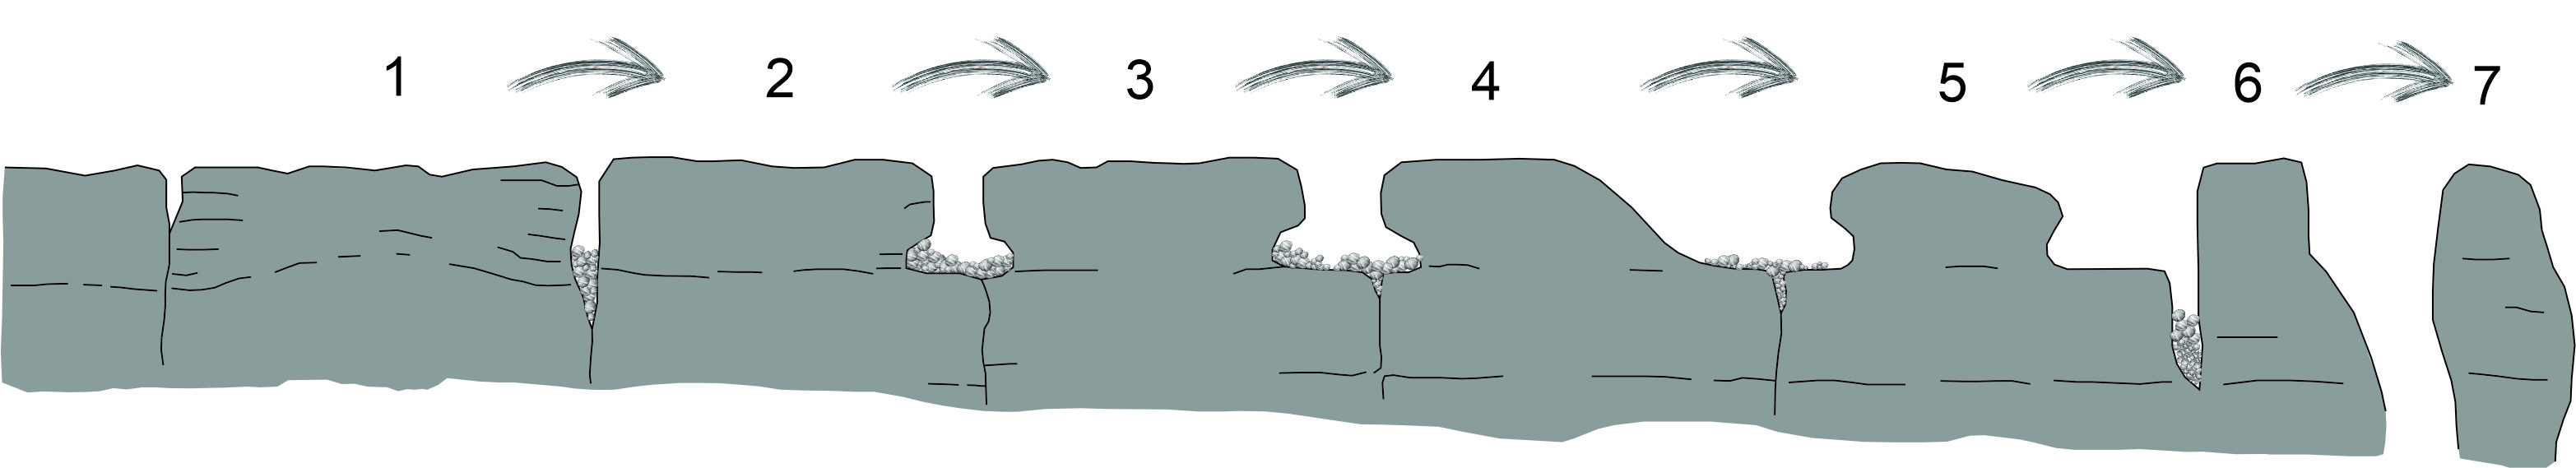 Schematic sketch of the formation mechanism of the “Monoliths” due to the erosional action of the water